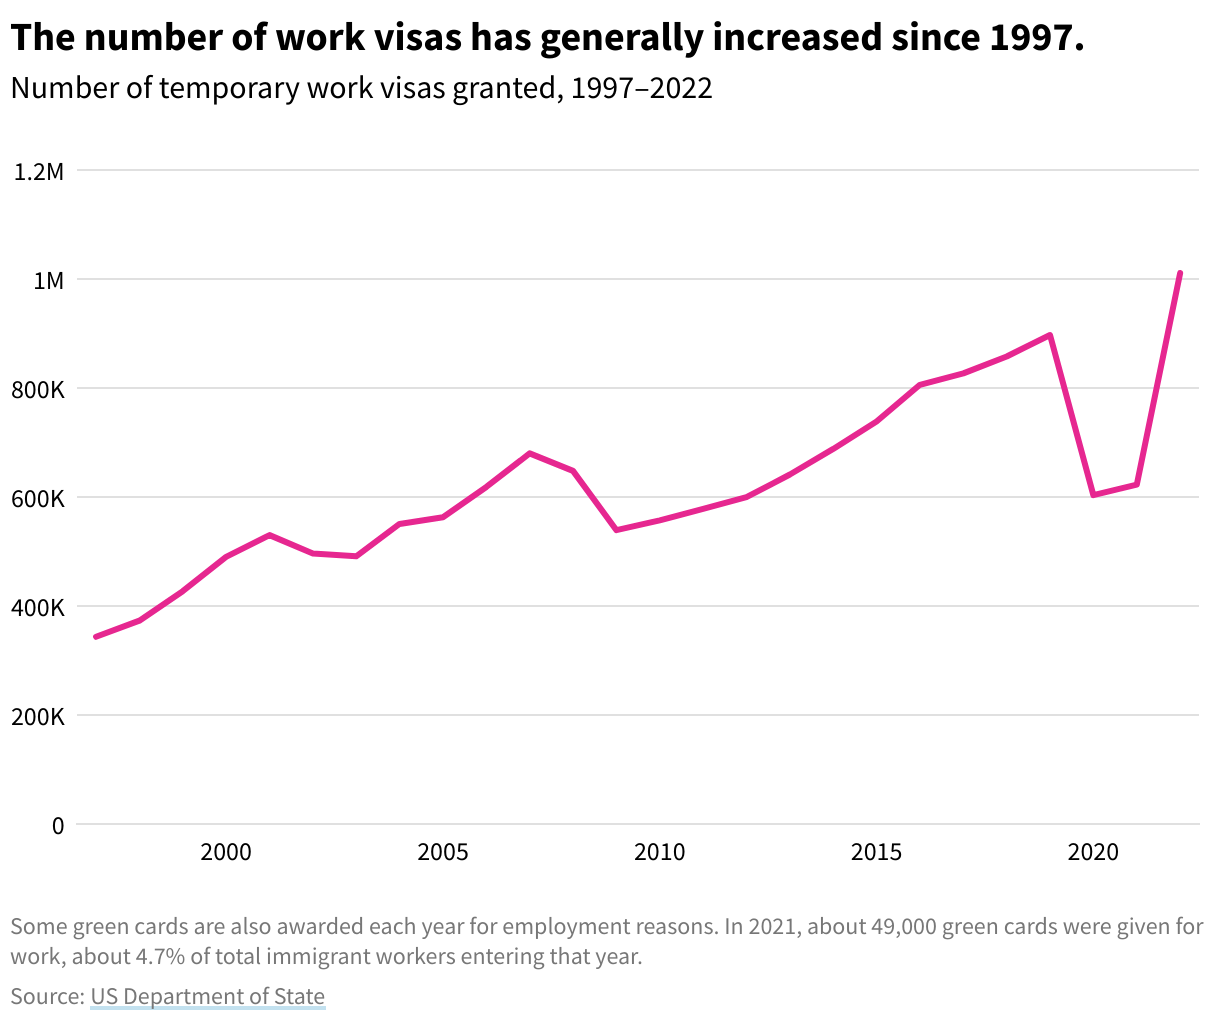 Line chart of the number of temporary work visas granted from 1997 to 2022 with a general upward trend and a dip during the pandemic in 2020 and 2021.